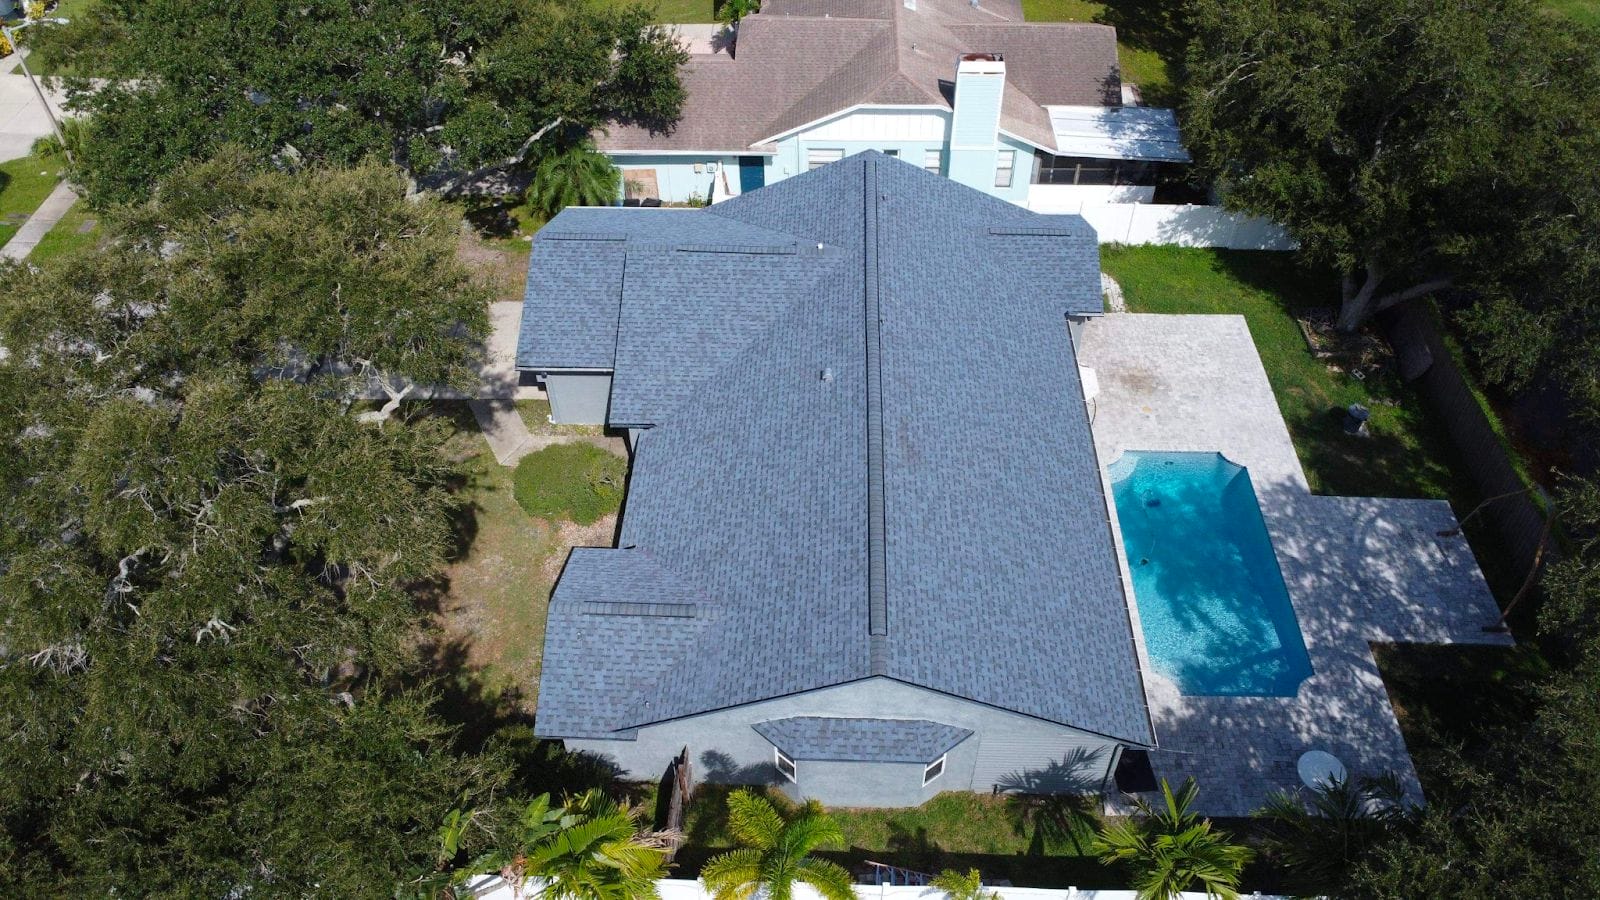 St. Petersburg and Tampa trusted local roofers